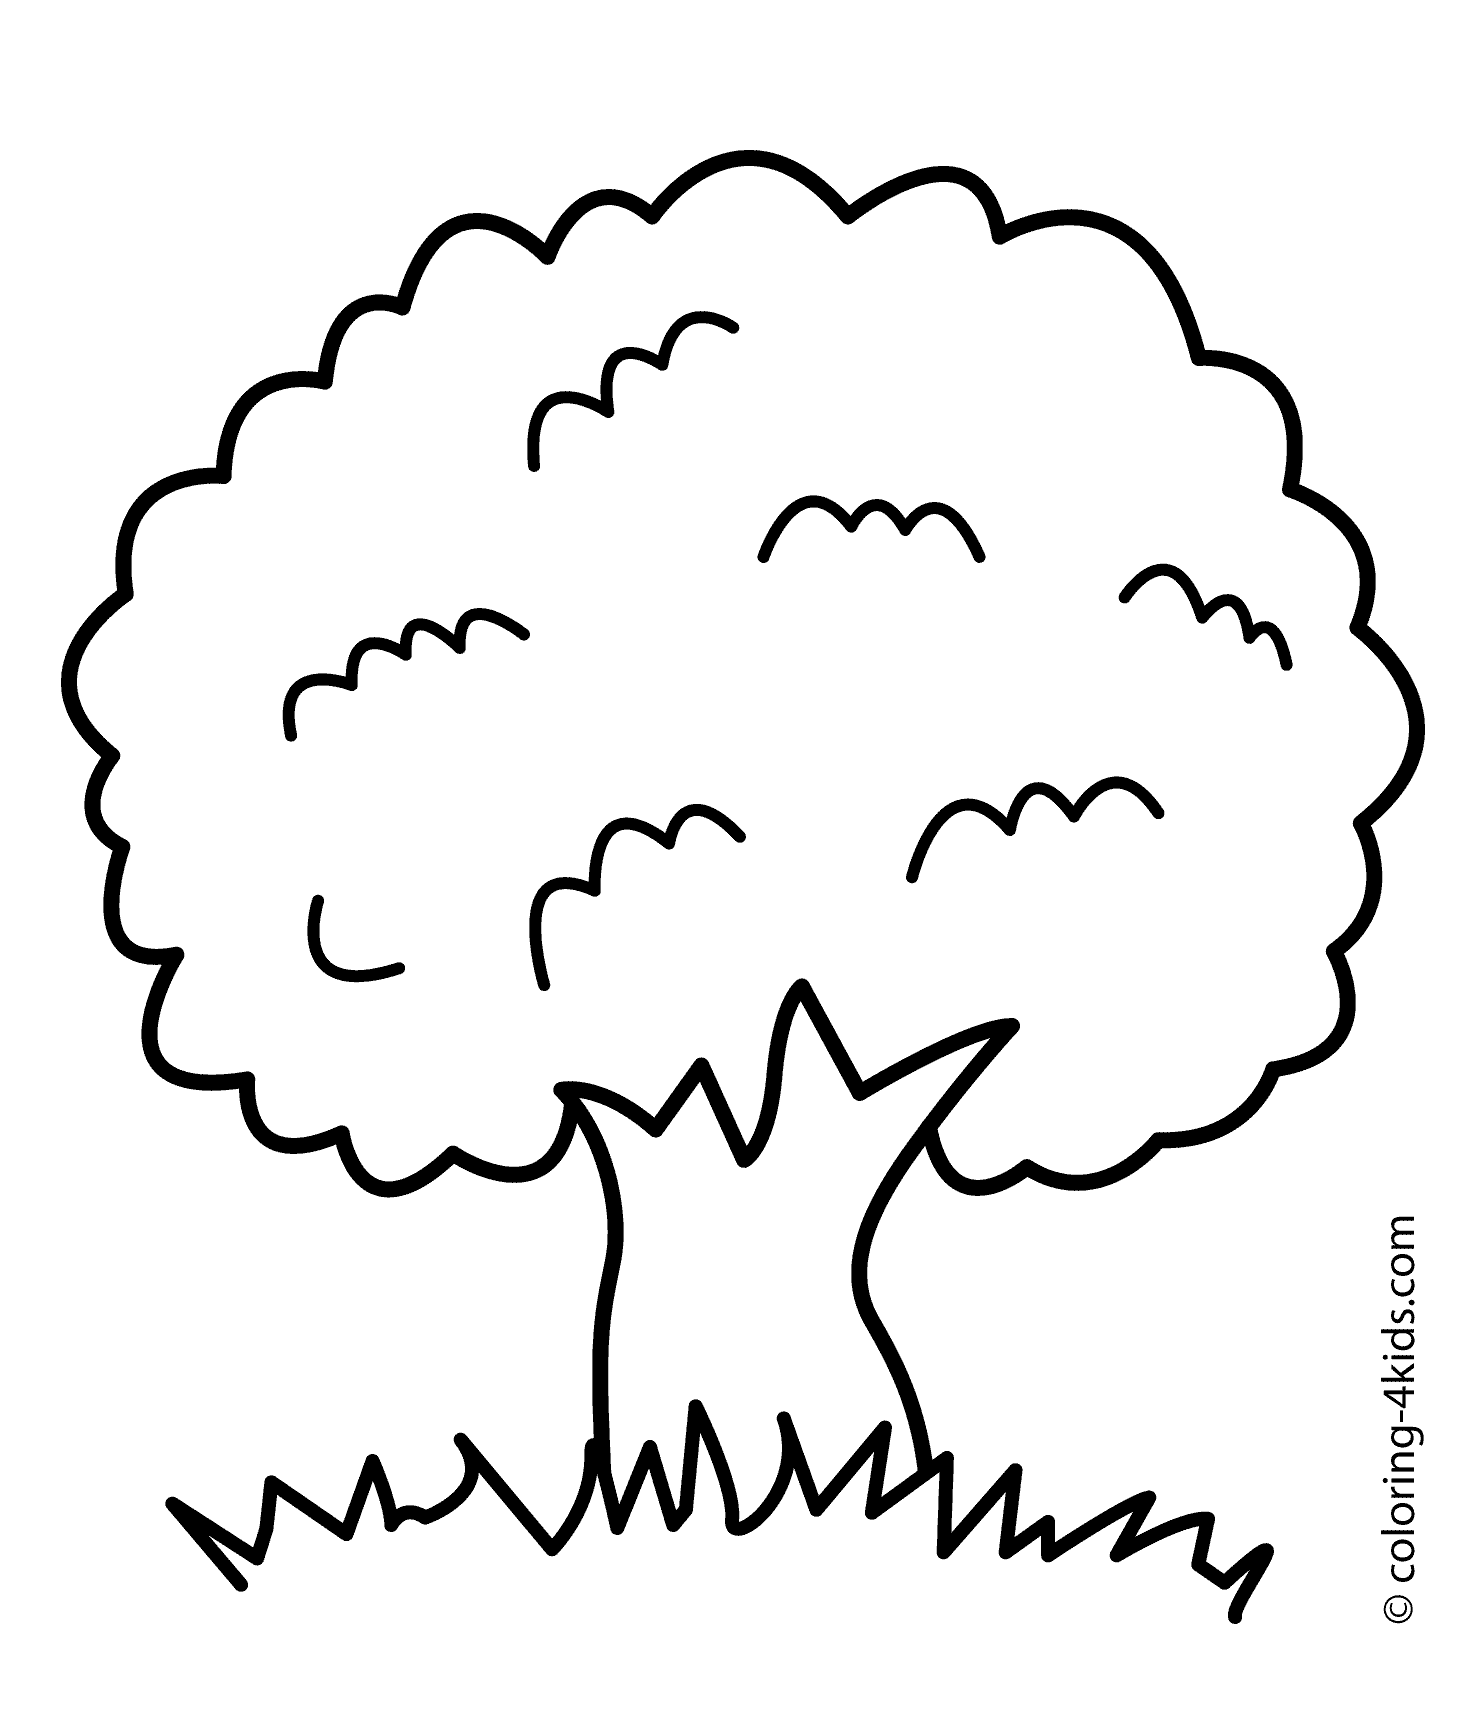 free-tree-birthday-coloring-page-download-free-tree-birthday-coloring-page-png-images-free